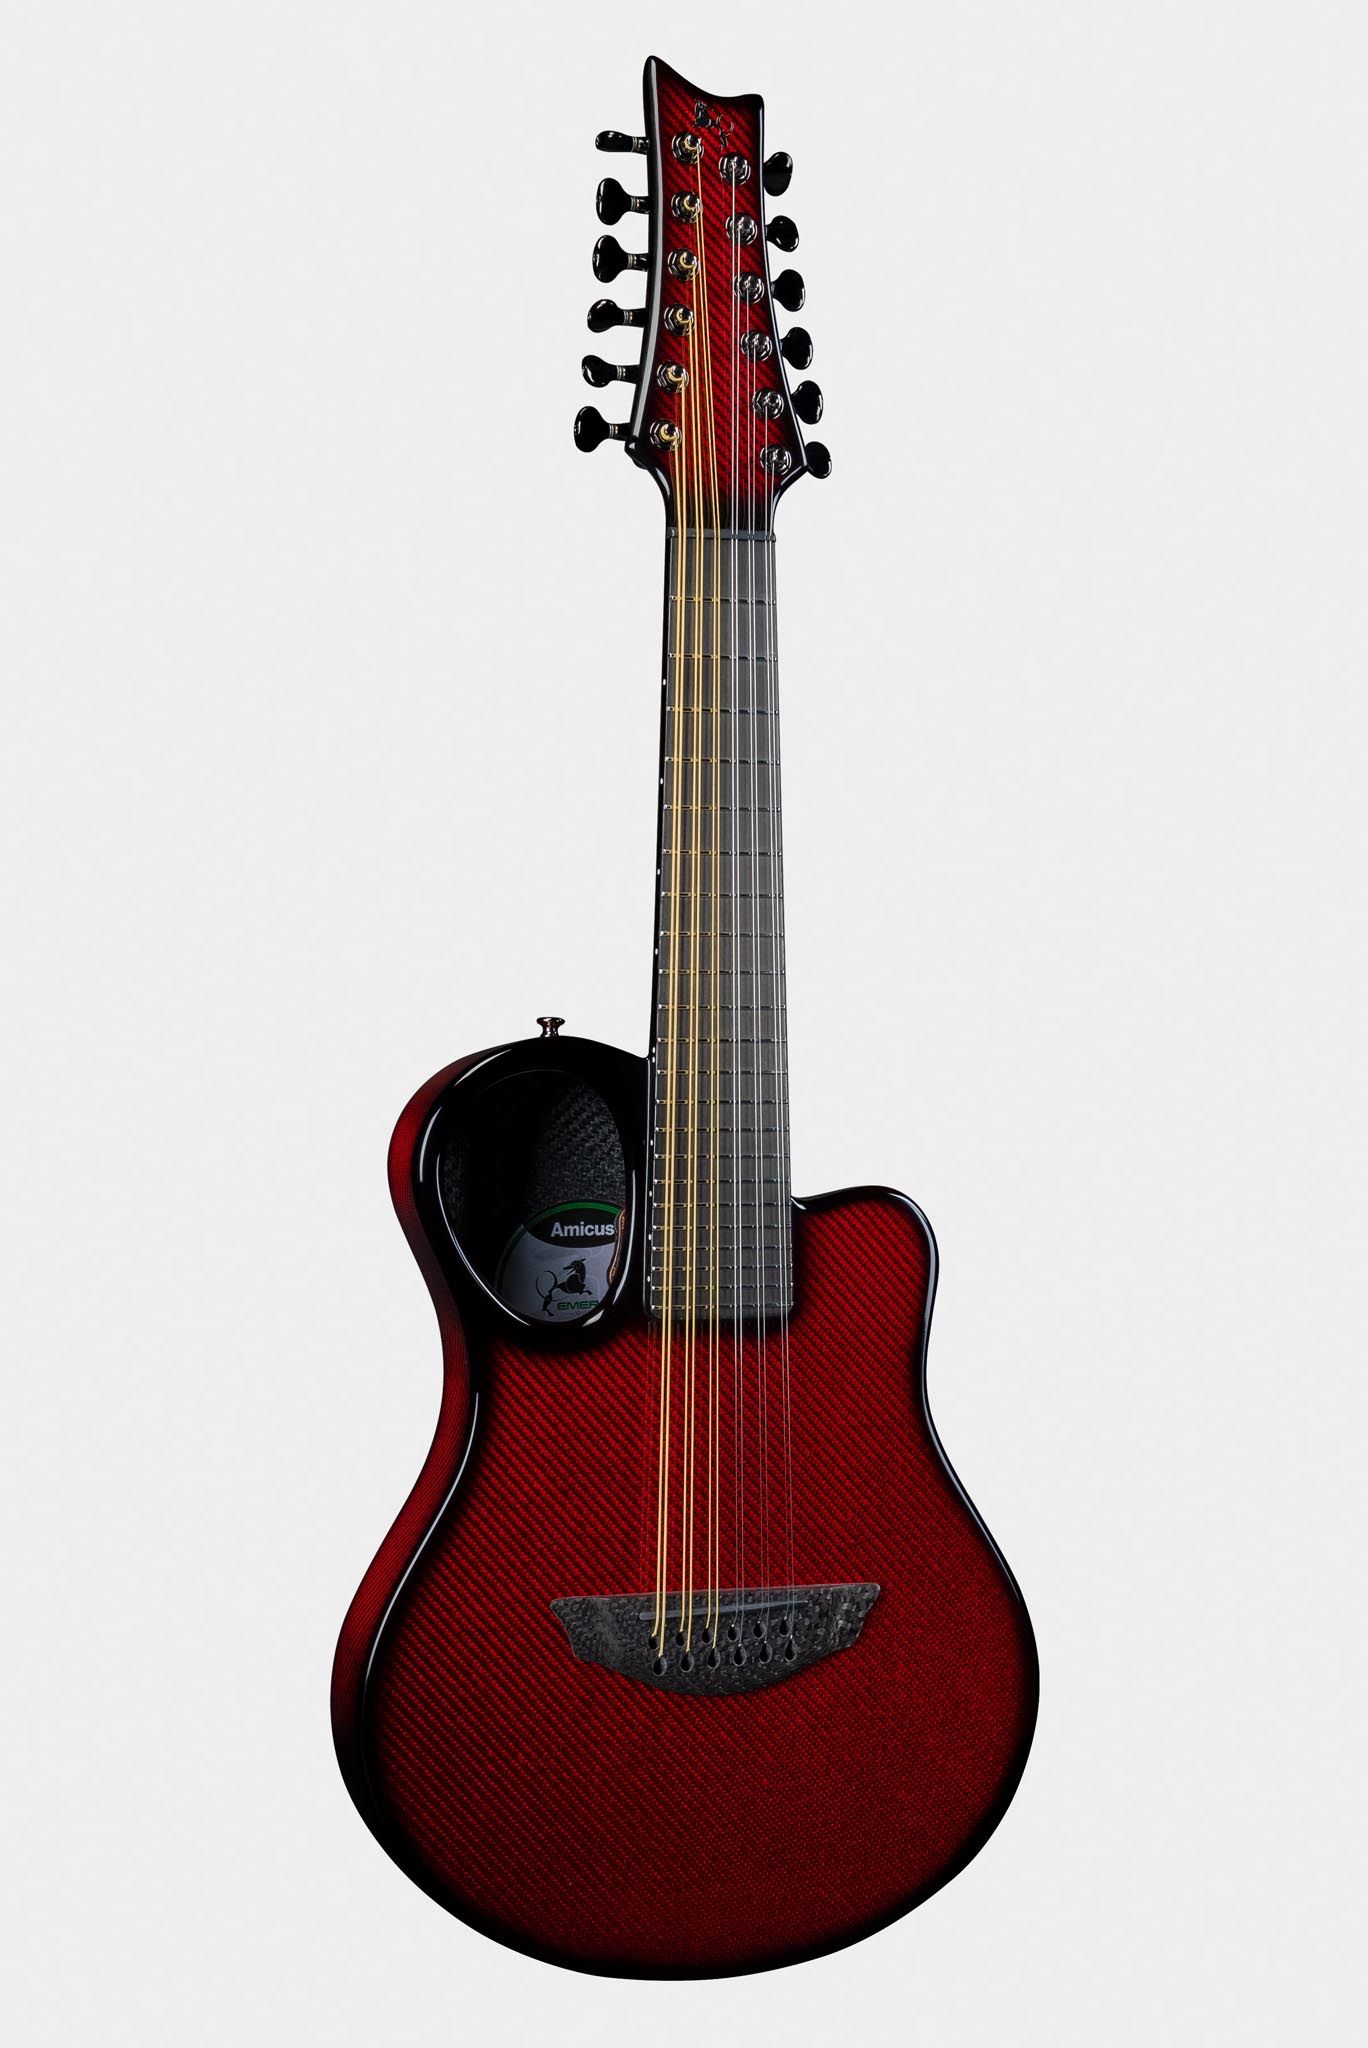 Emerald Guitars Amicus model with vibrant red finish and carbon fiber body